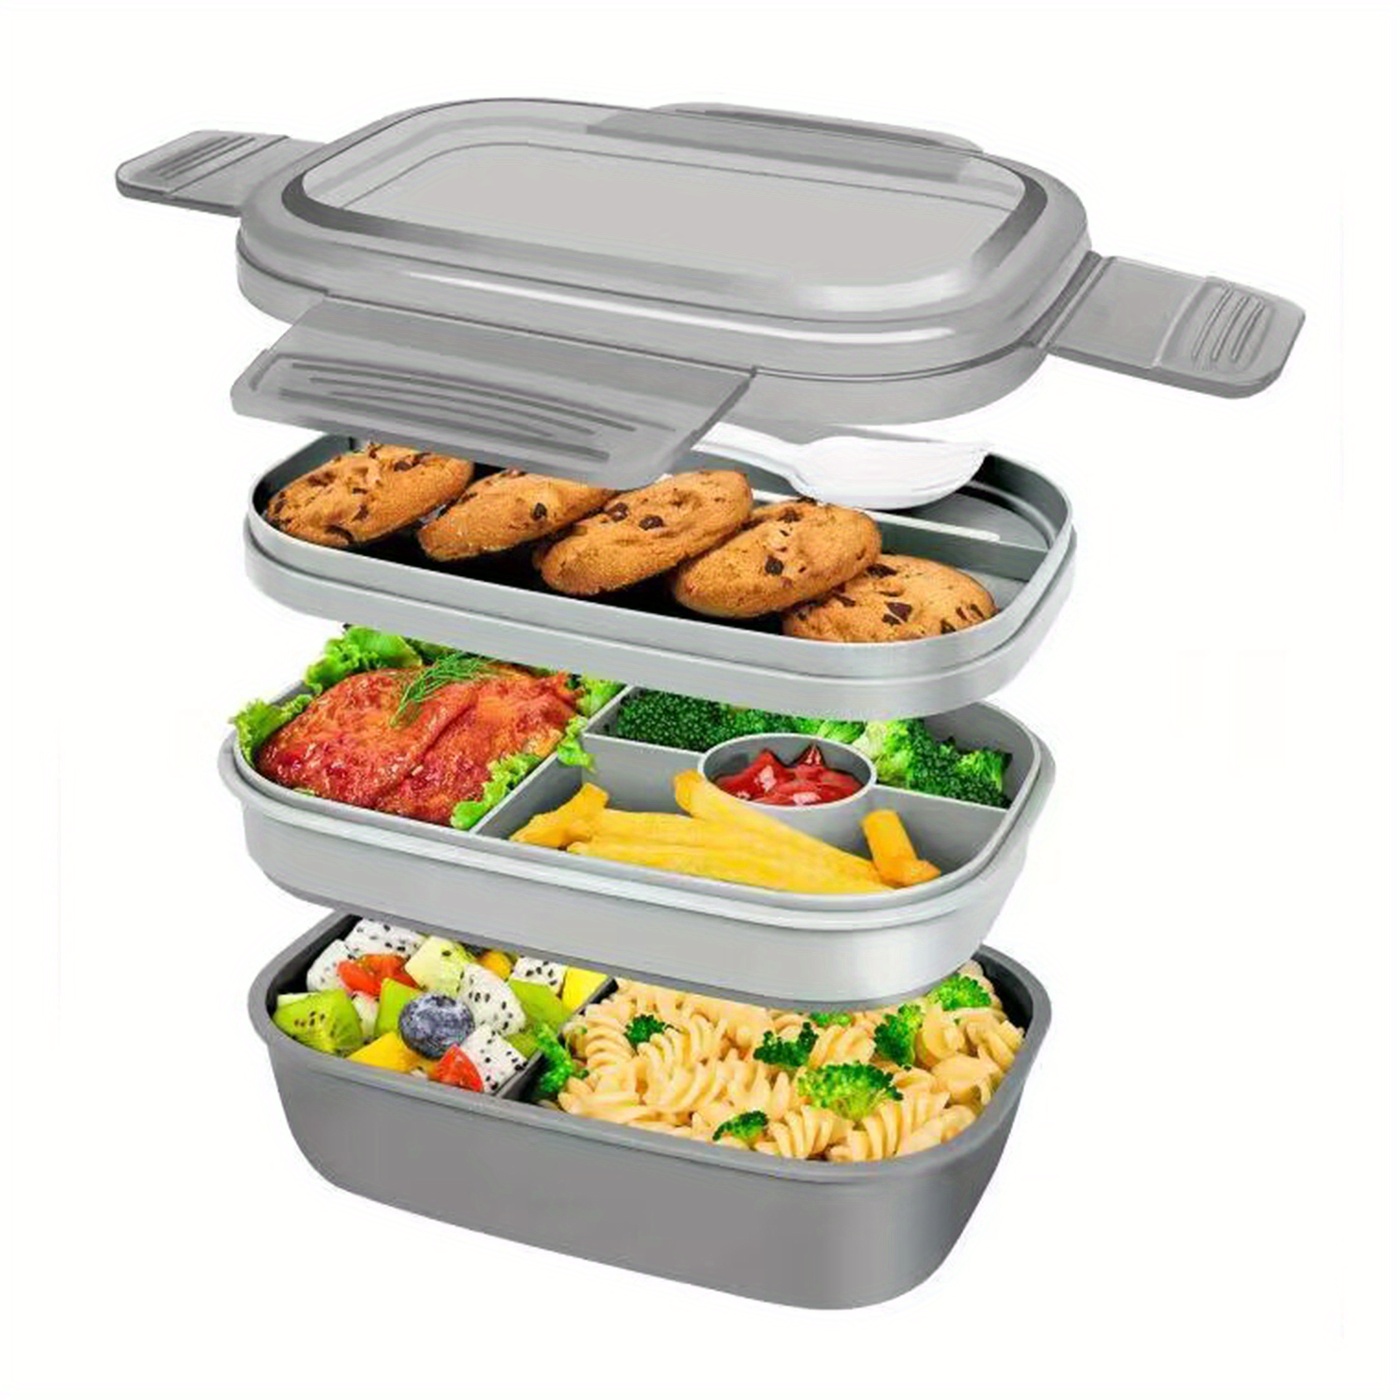  Easy Togo 3 Tier Bento Box Adult Lunch Box with Insulated Lunch  Bag & Cutlery Set, Meal Prep Reusable Lunch Containers, Stackable Stainless  Steel Hot Food Container With 3 Compartment, 43